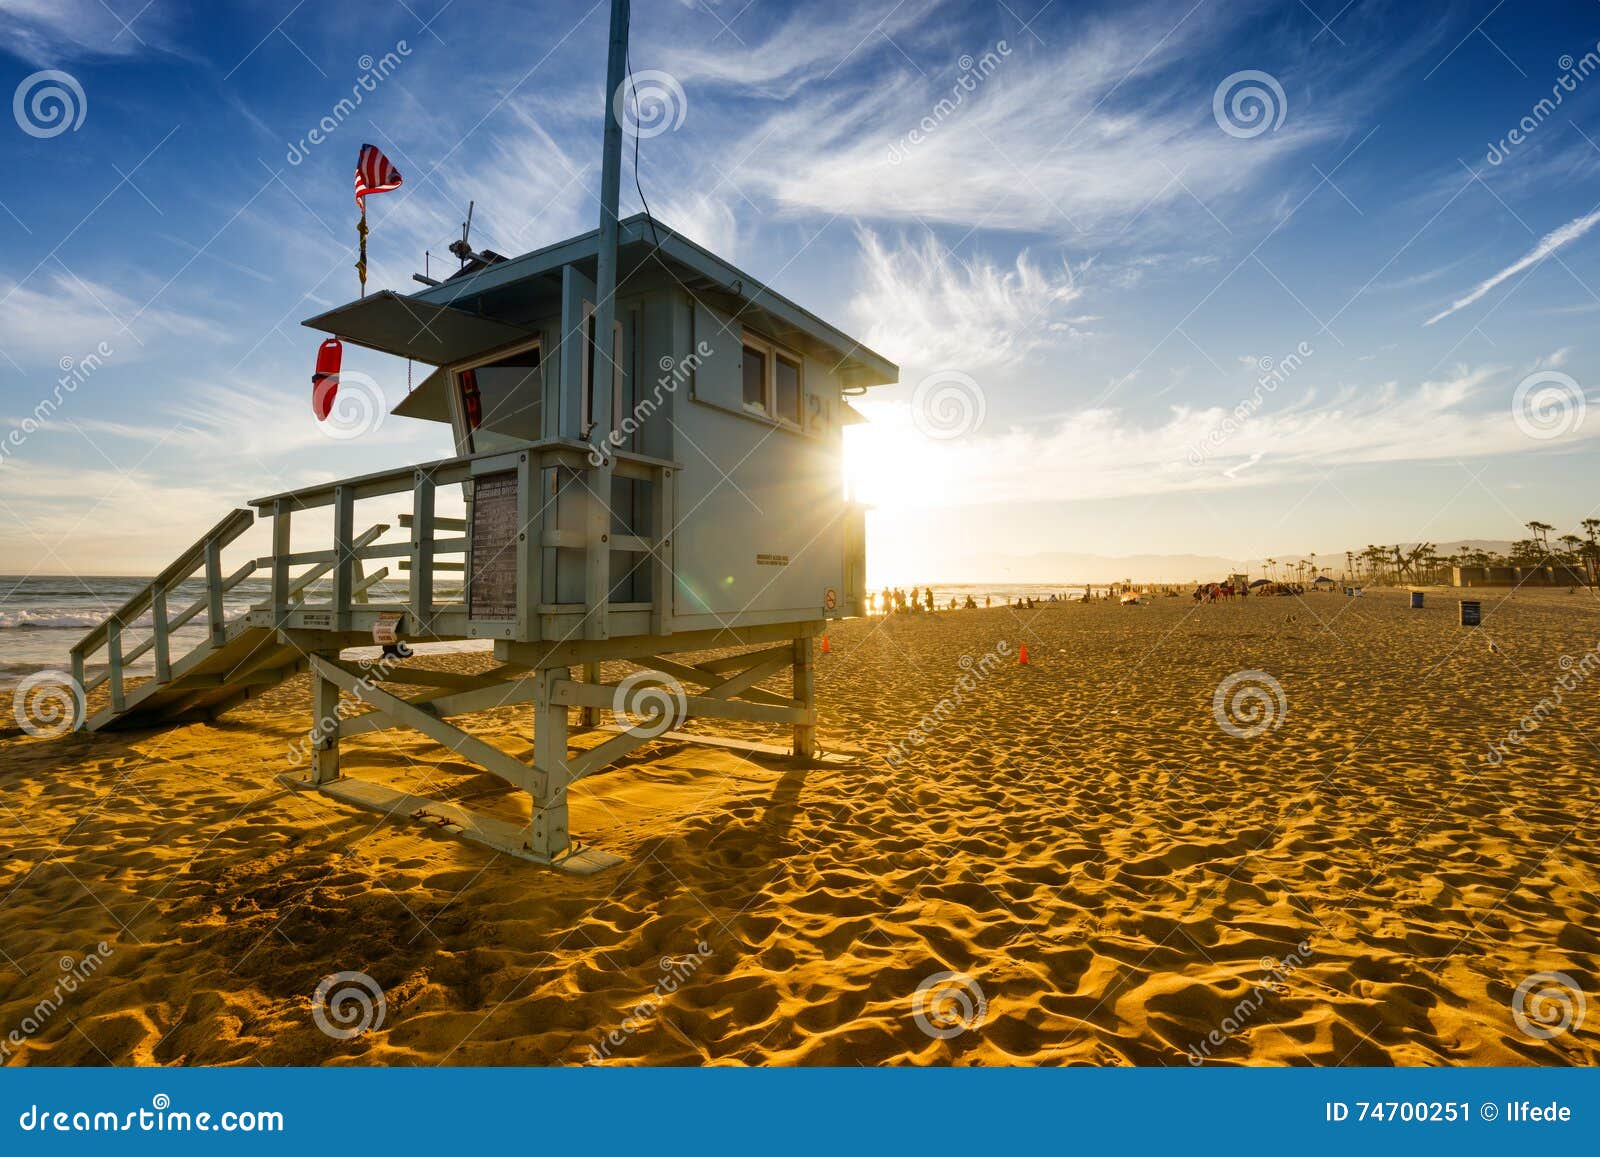 venice beach at sunset in los angeles